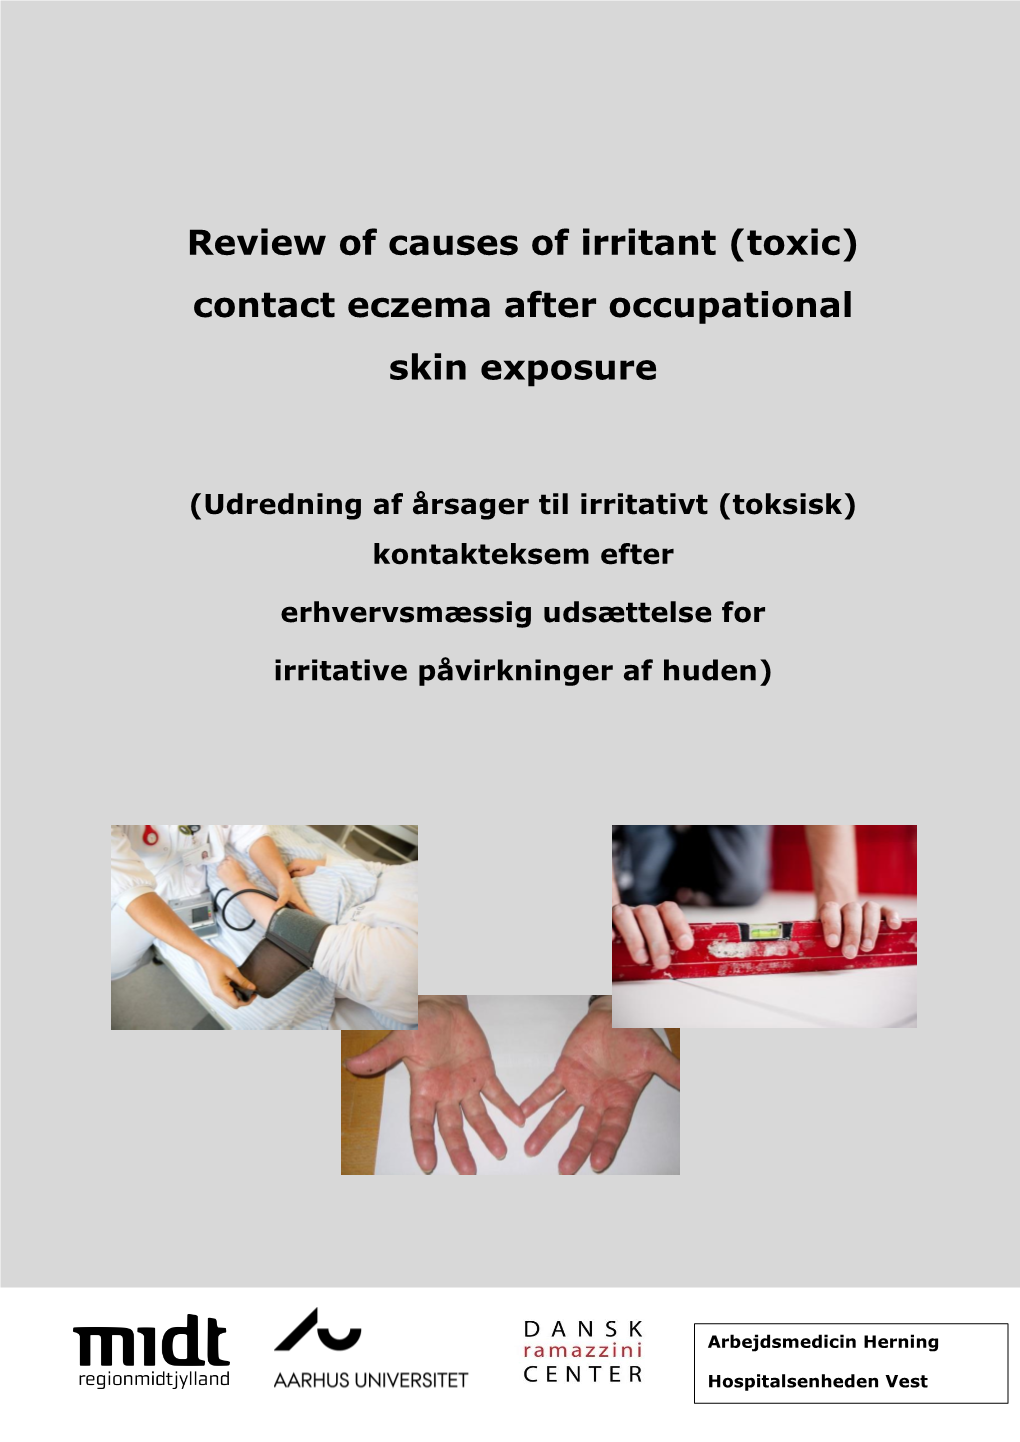 Review of Causes of Irritant (Toxic) Contact Eczema After Occupational Skin Exposure